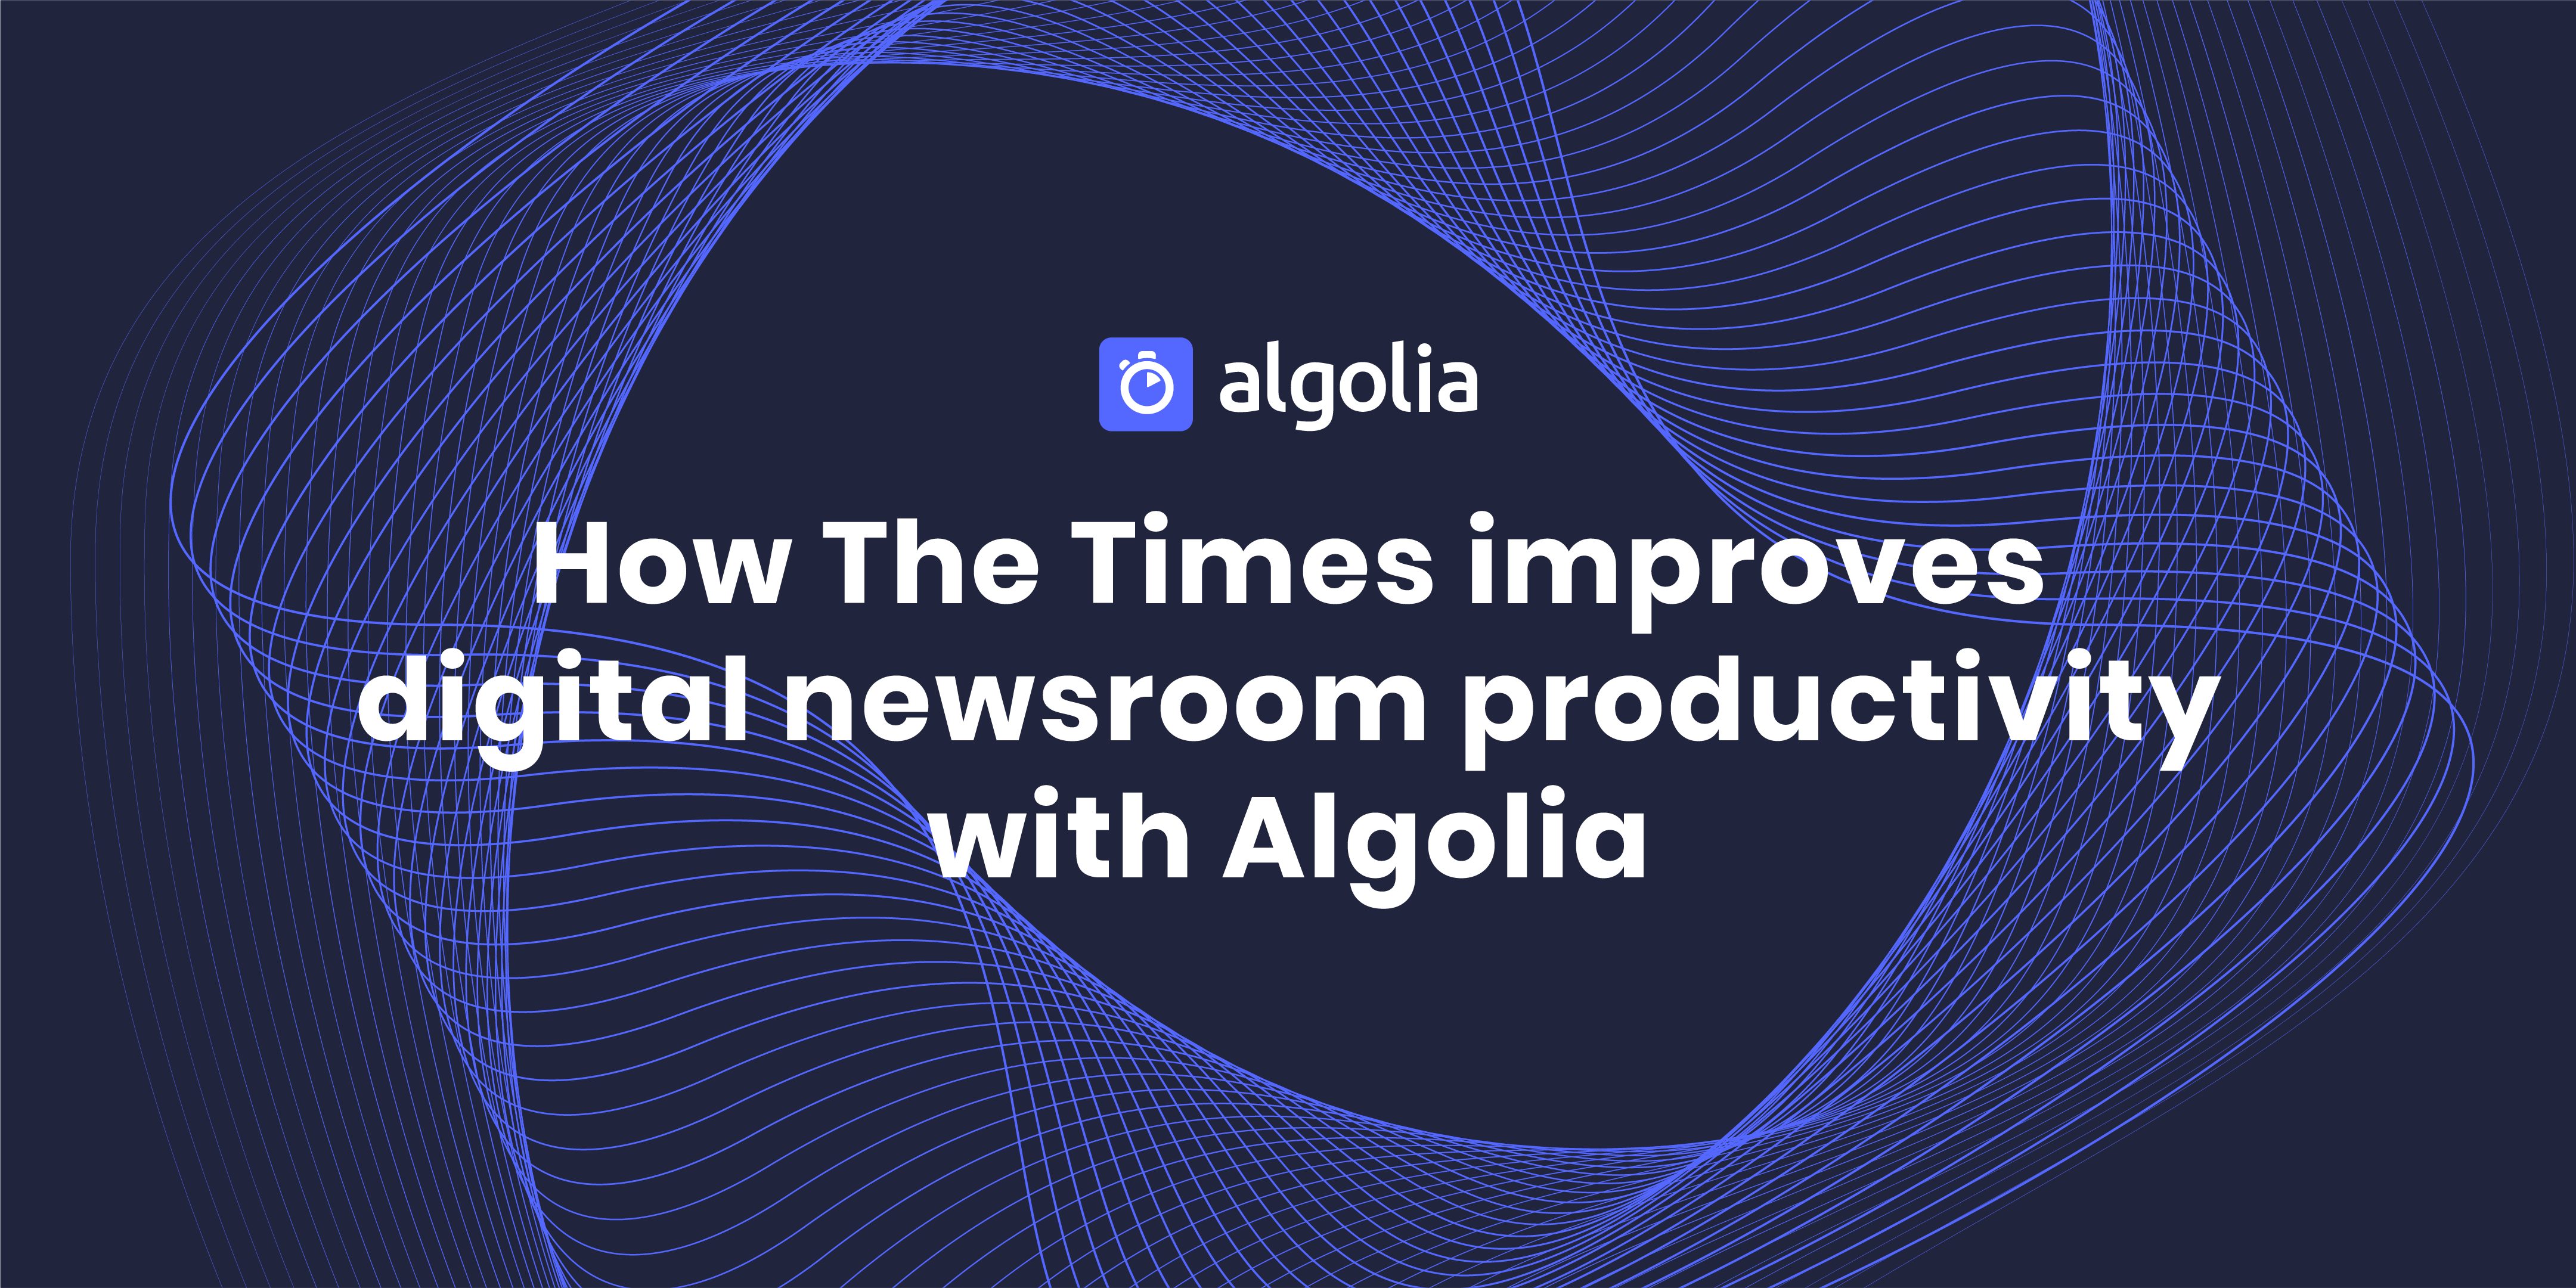 Matt Taylor showcases The Times' fast, easy-to-use digital newsroom with Algolia